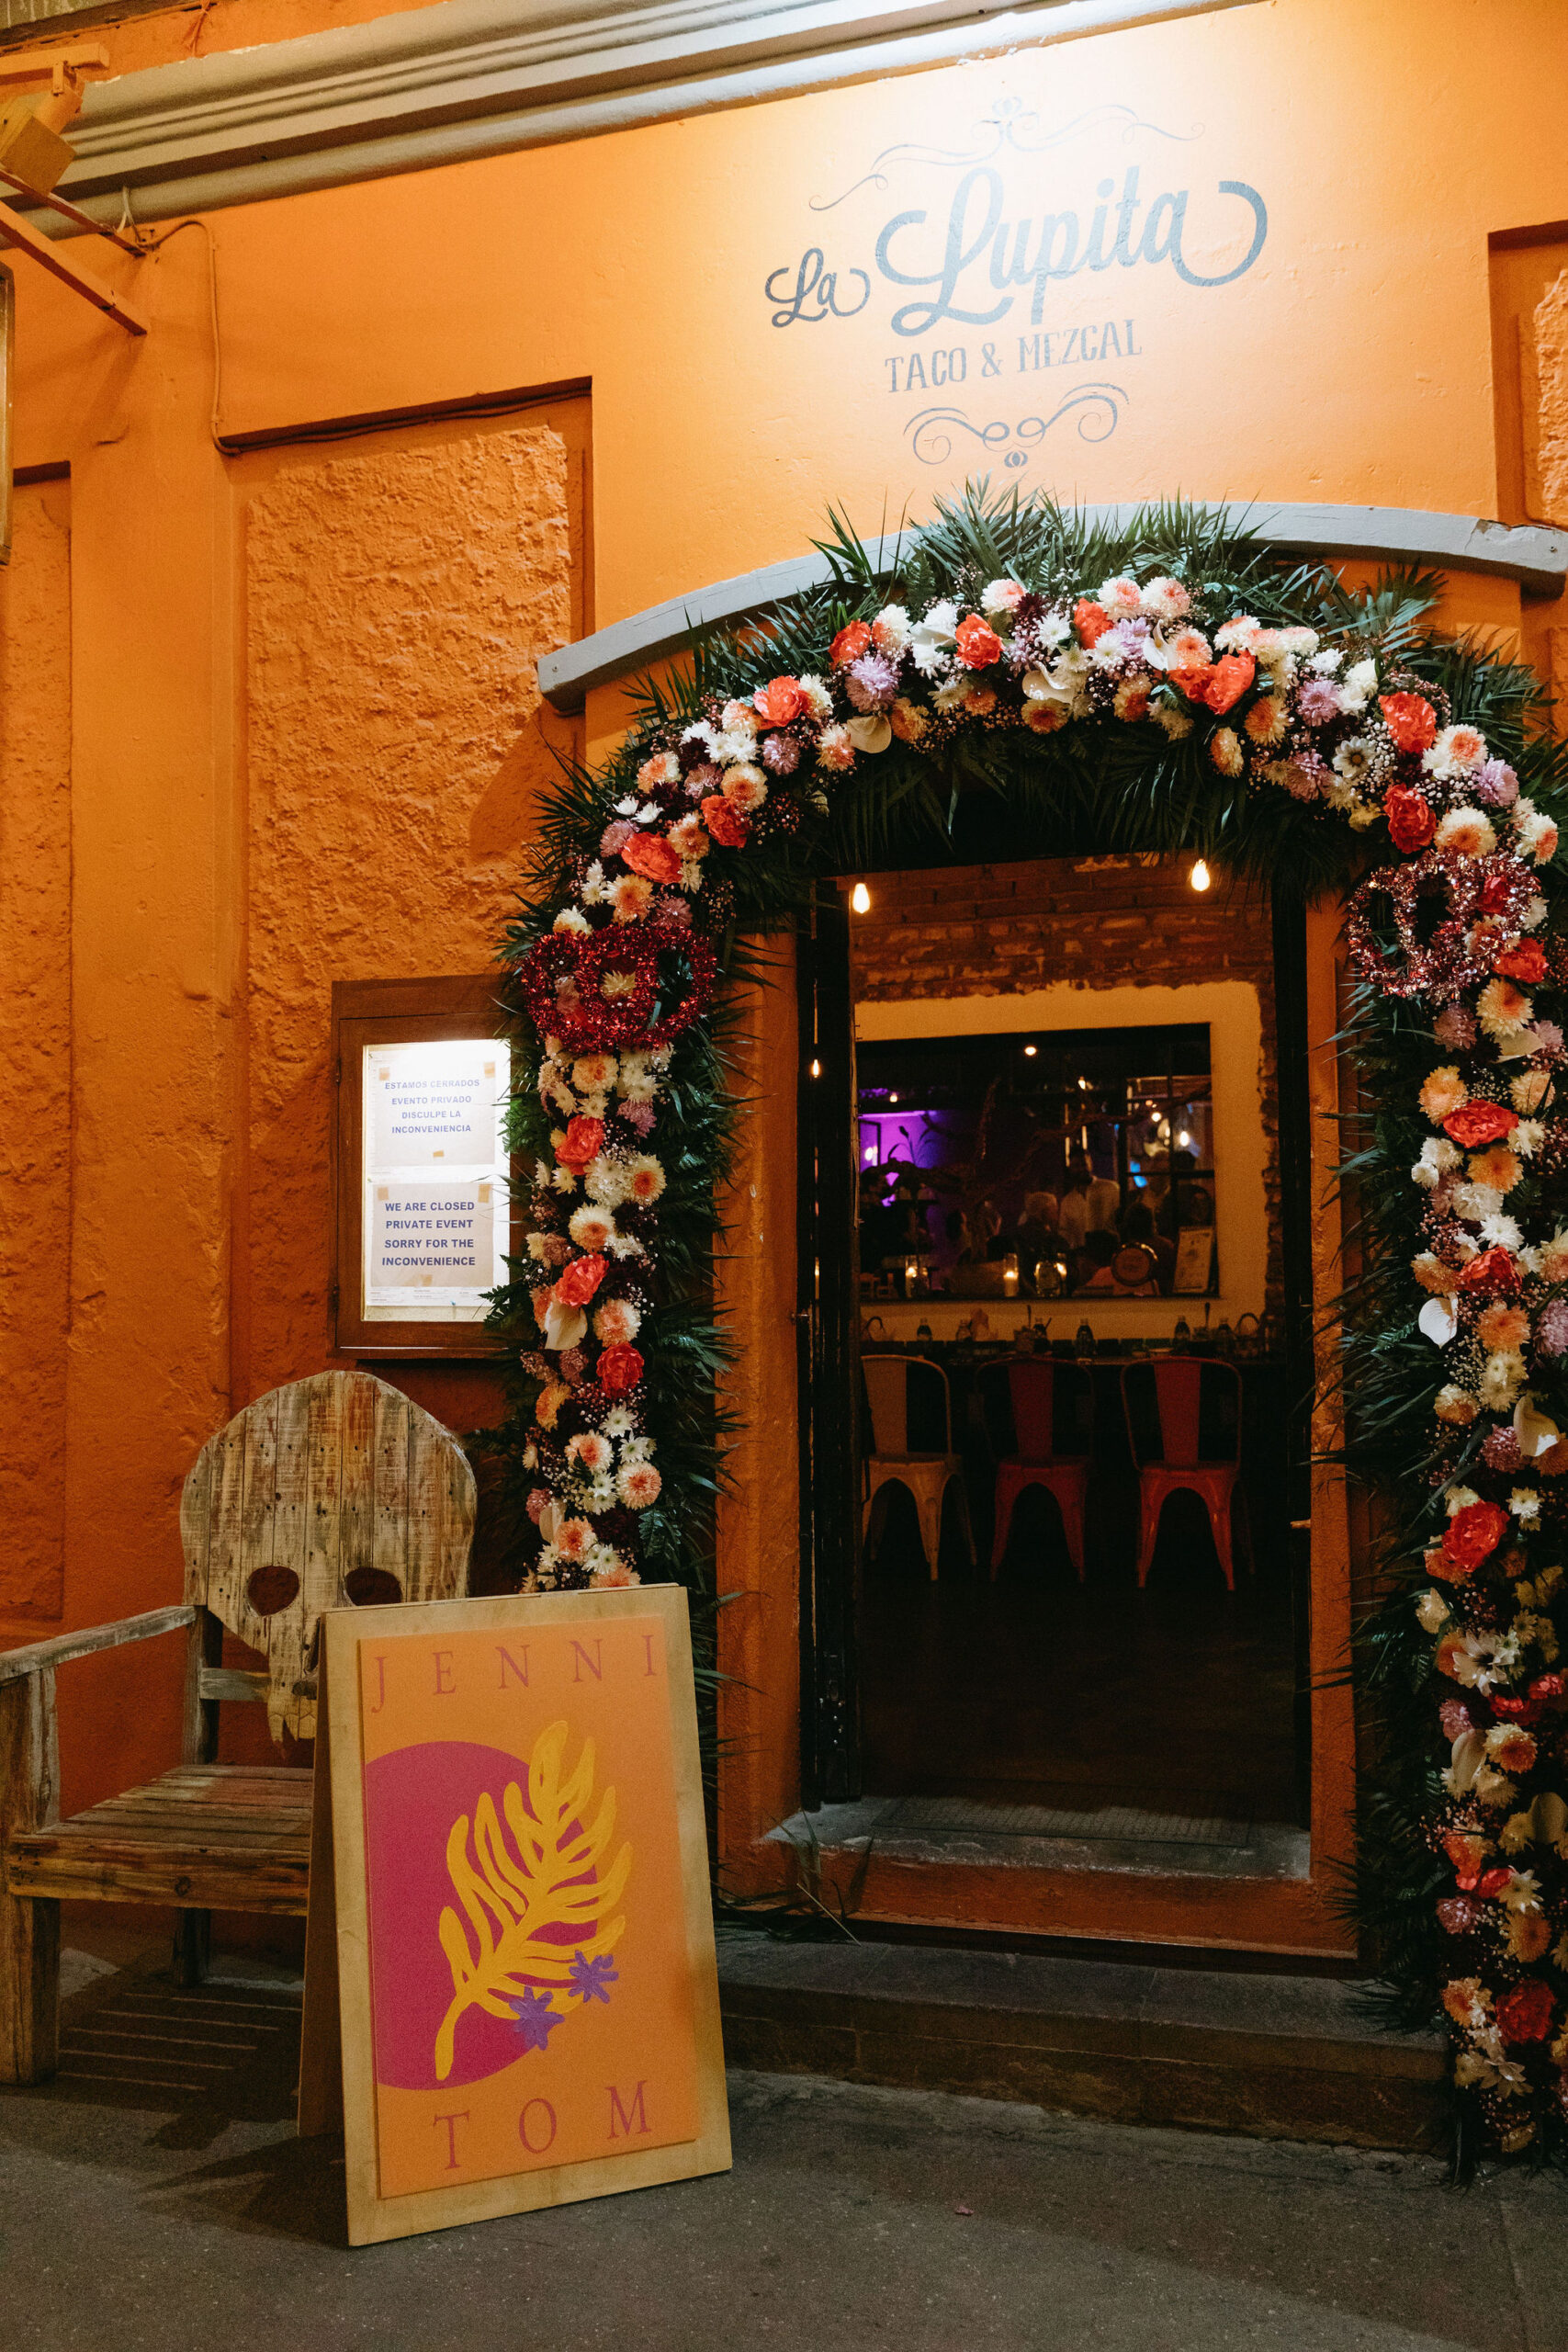 front of La Lupita restaurant San Jose Del Cabo, Mexico. Orange building with floral archway and distressed wooden chair with a skull-shaped back. wooden sandwich board with colorful (orange, pink, yellow and purple) design. Jenni and Tom welcome sign. 
